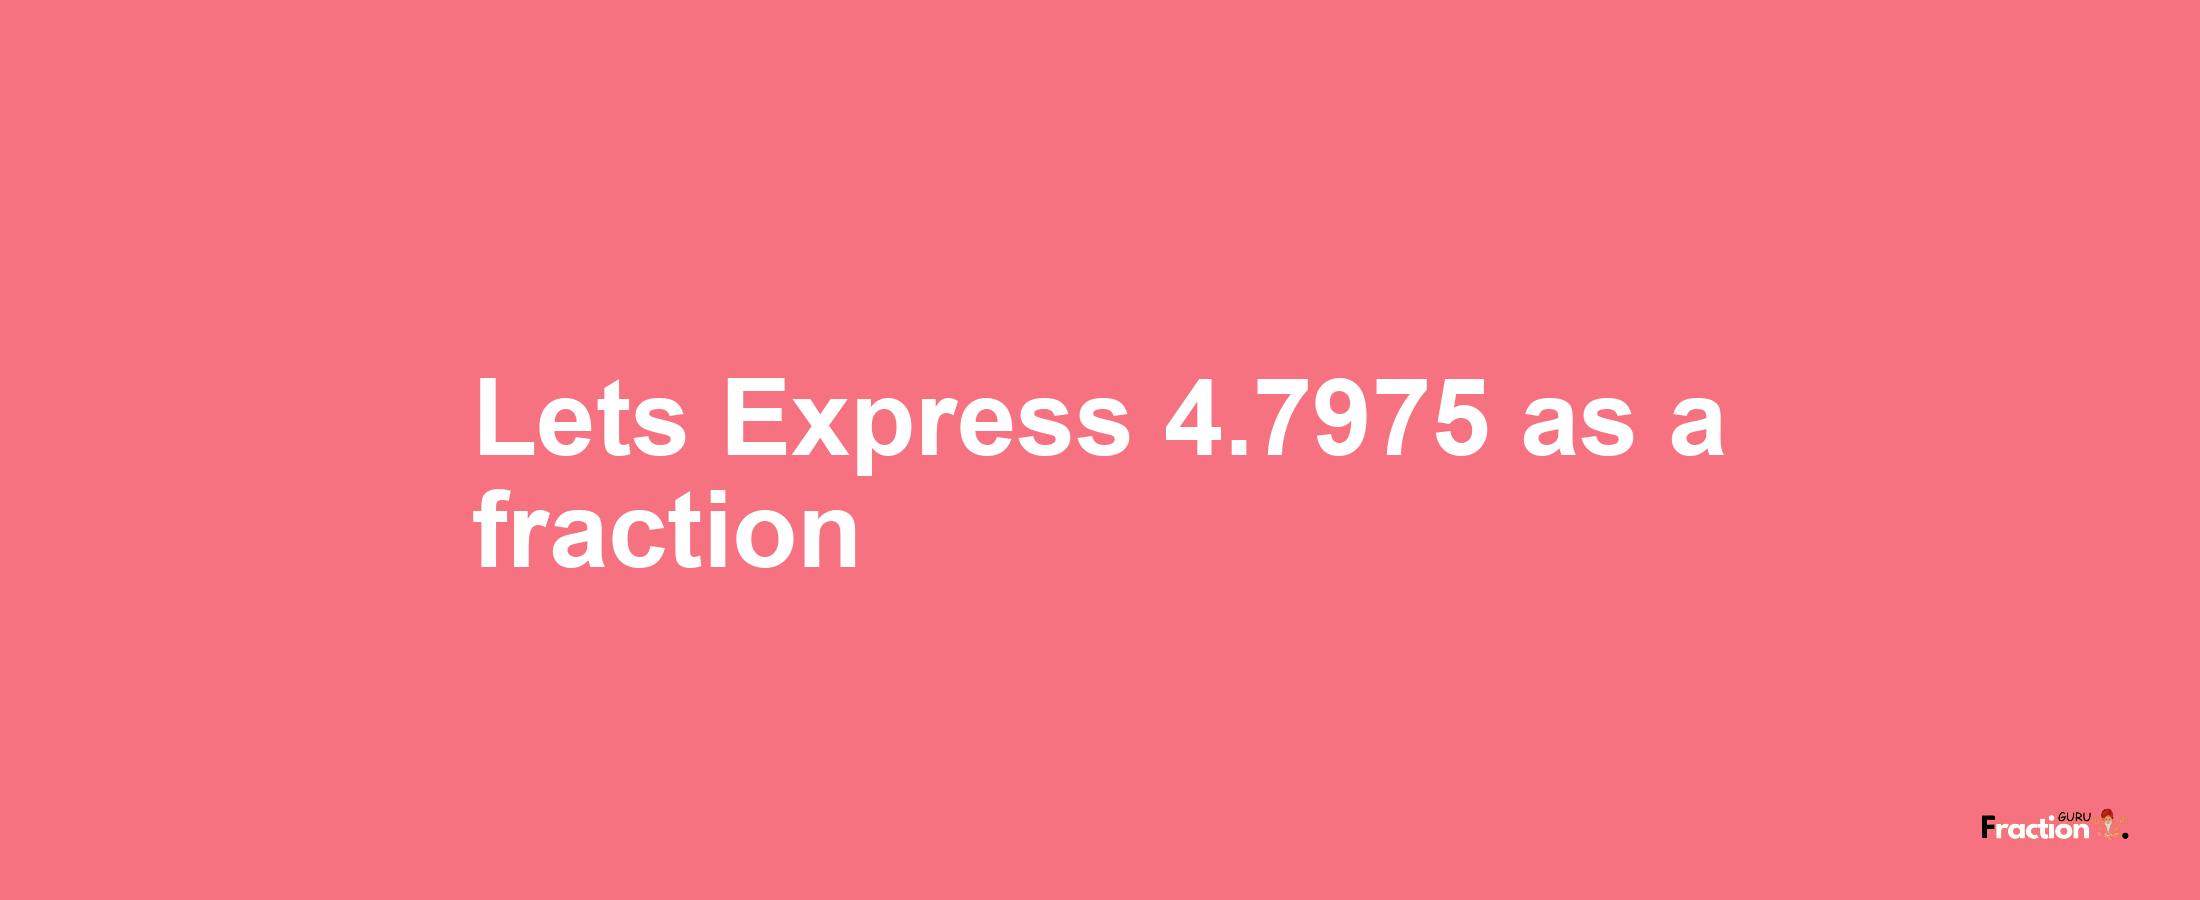 Lets Express 4.7975 as afraction